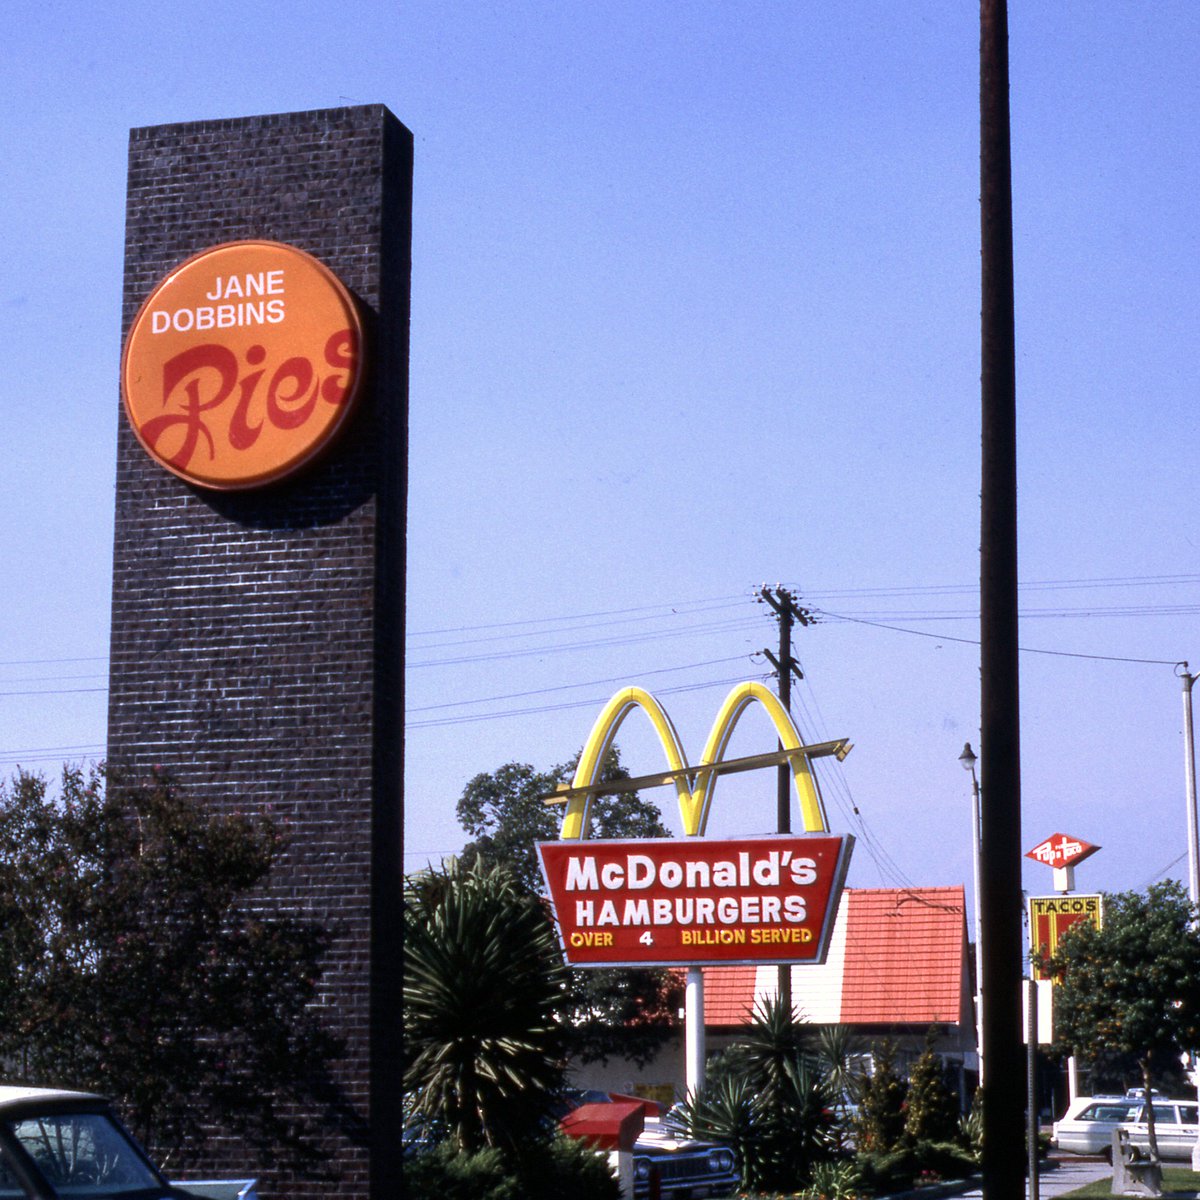 Happy #PiDay! In 1968, Ray Kroc of McDonalds started a pie shop and named it after his wife, Jane Dobbins Pies. #Unimark International proposed graphics which are preserved in these 35mm slides. #DesignArchives #mmmmPie More: tinyurl.com/3hnm2kmw